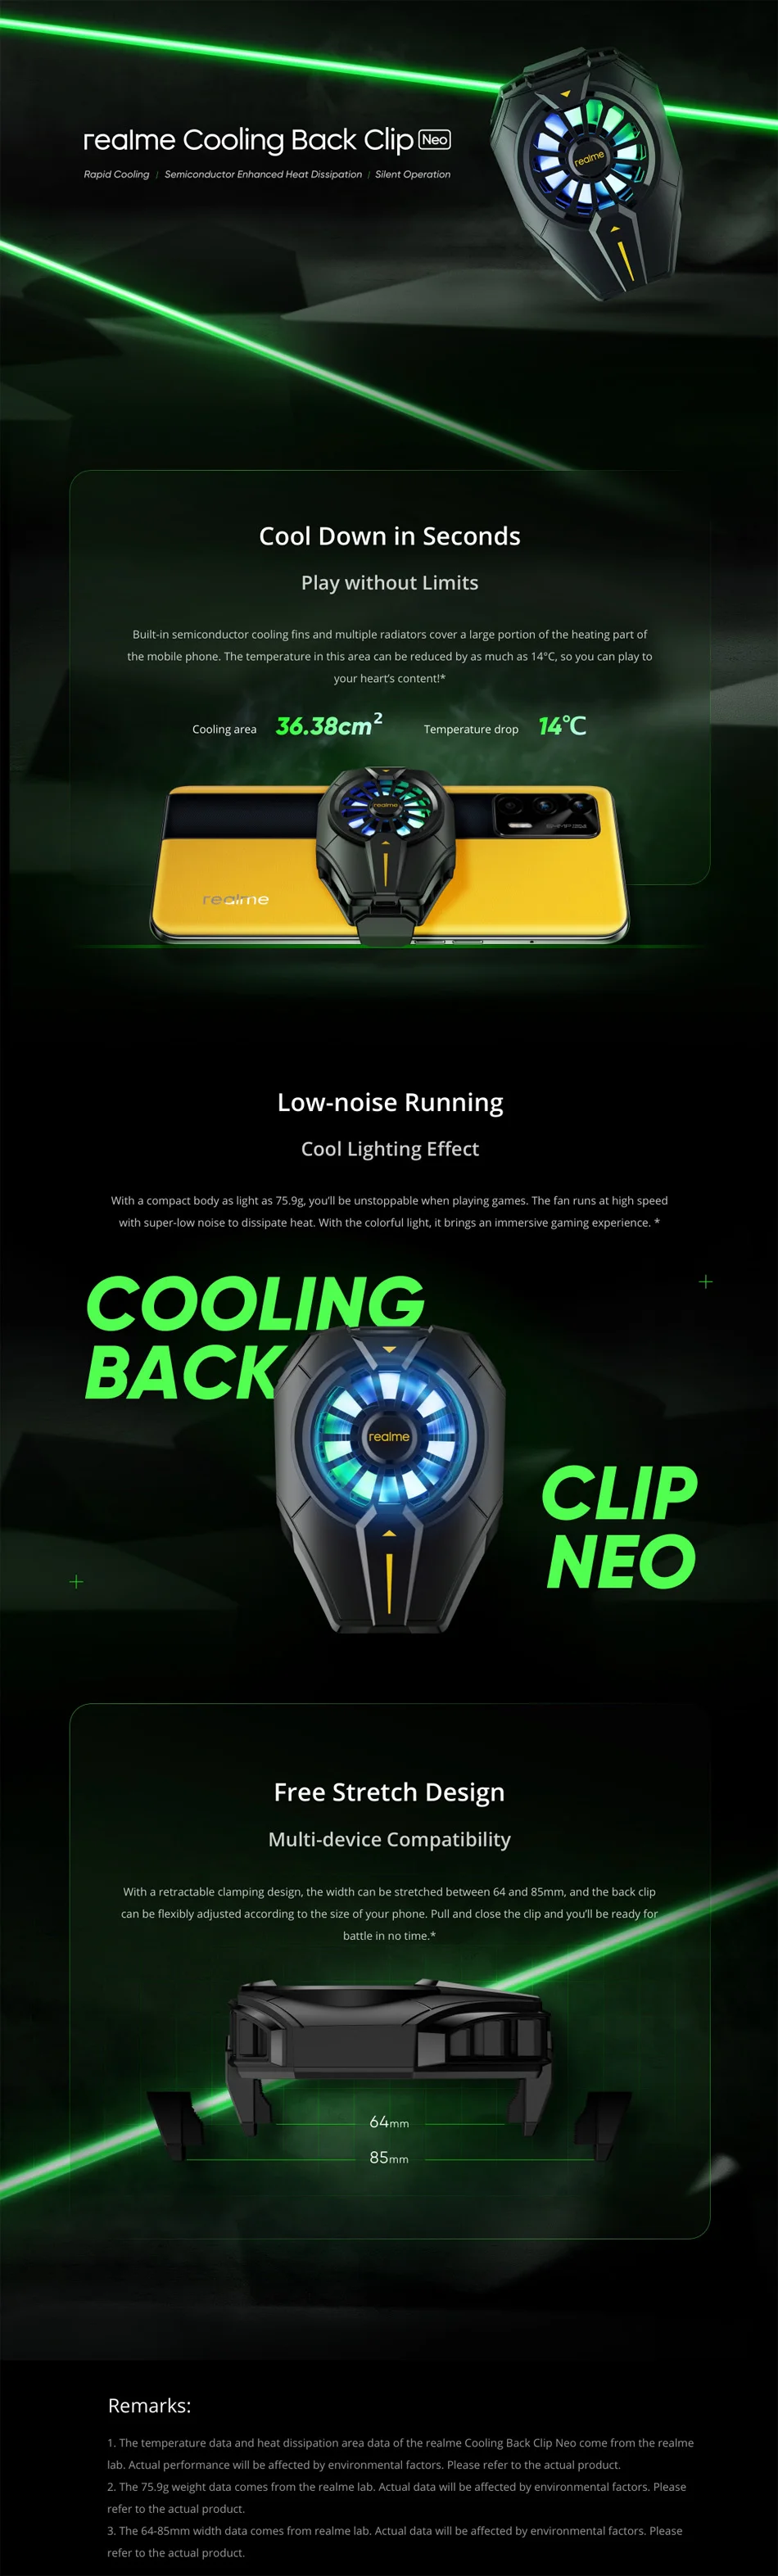 Realme Cooling Back Clip Neo 4